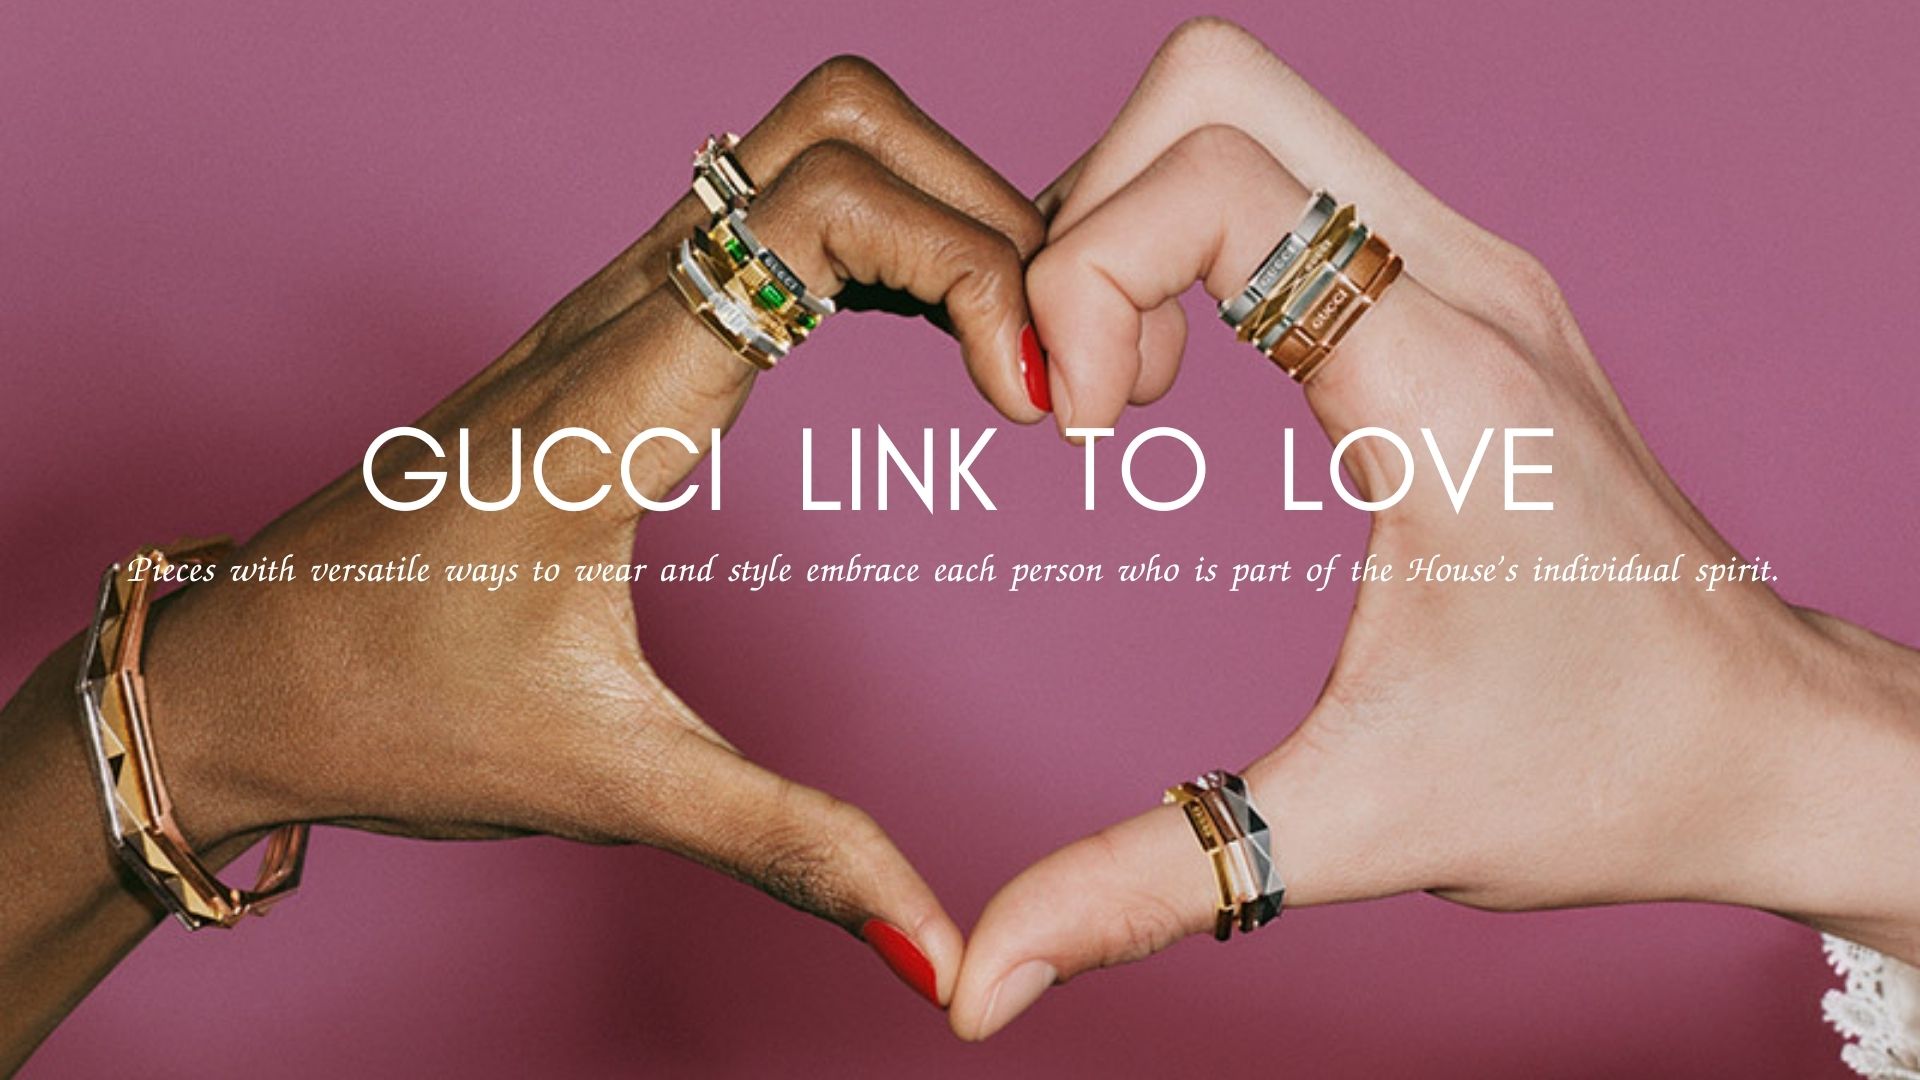 Gucci Link to Love